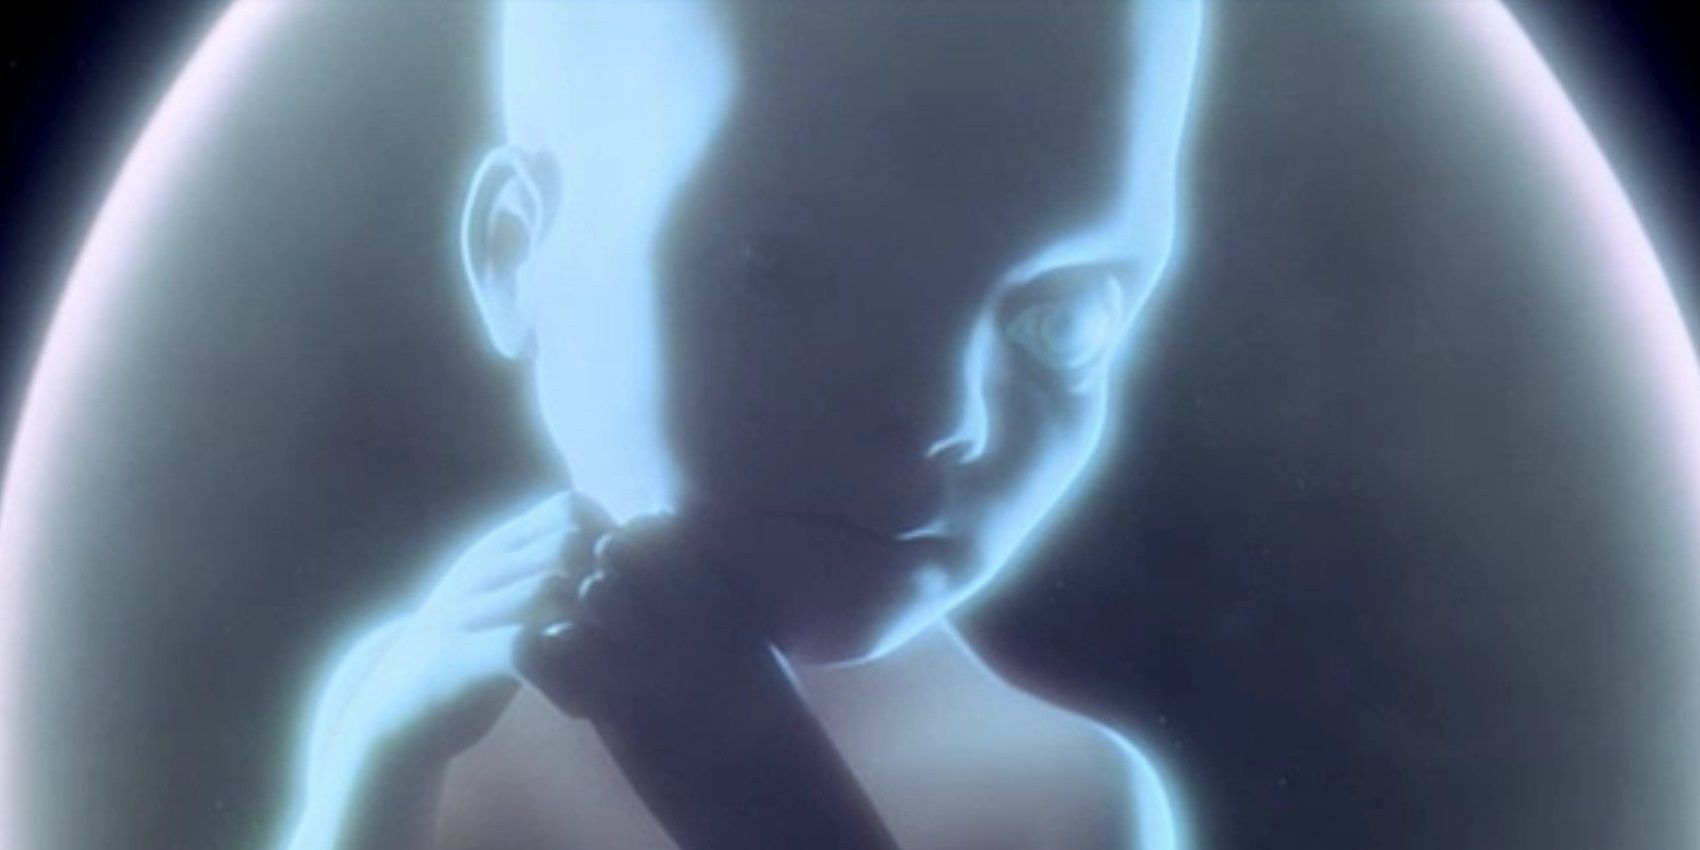 The Star Child at the end of 2001 A Space Odyssey